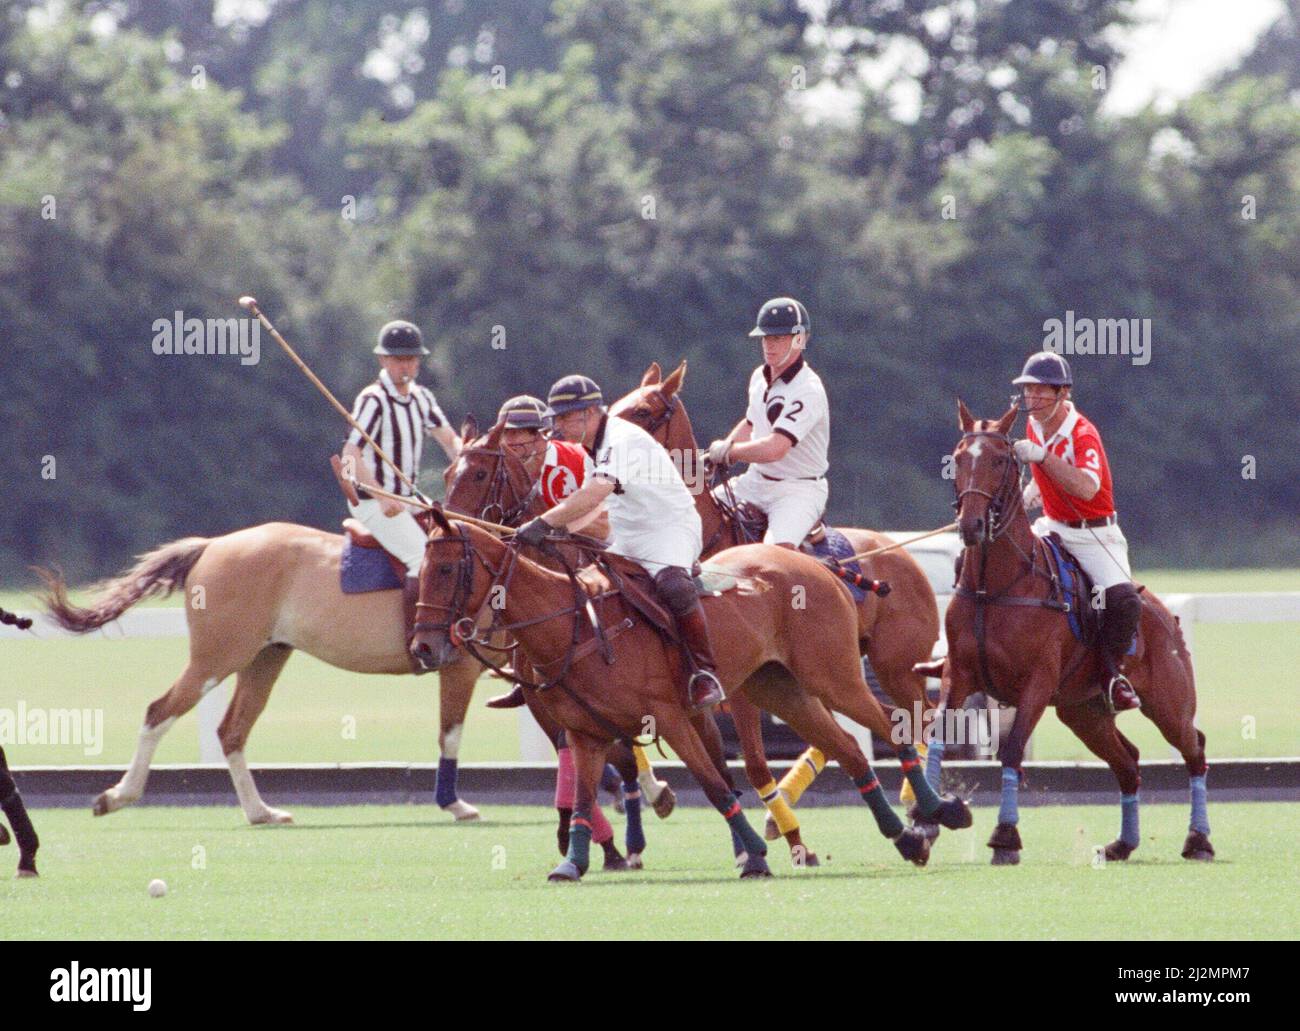 Prince Charles (Red shirt wearing number 3) was locked in a fierce battle with Princess Diana's friend Major James Hewitt  today (white shirt wearing number 2) , on the polo field. At one stage, as Major Hewitt challenged the prince, the commentator exclaimed 'Oh, I say ! That riding off was a bit  rough'  Despite determined riding by Charles, the Gulf hero's team won 4-1 at Windsor.  The polo prizes were presented by another royal, Princess Beatrice, the two year old daughter of The Duchess of York and Prince Andrew.  Picture taken 16th July 1991 Stock Photo